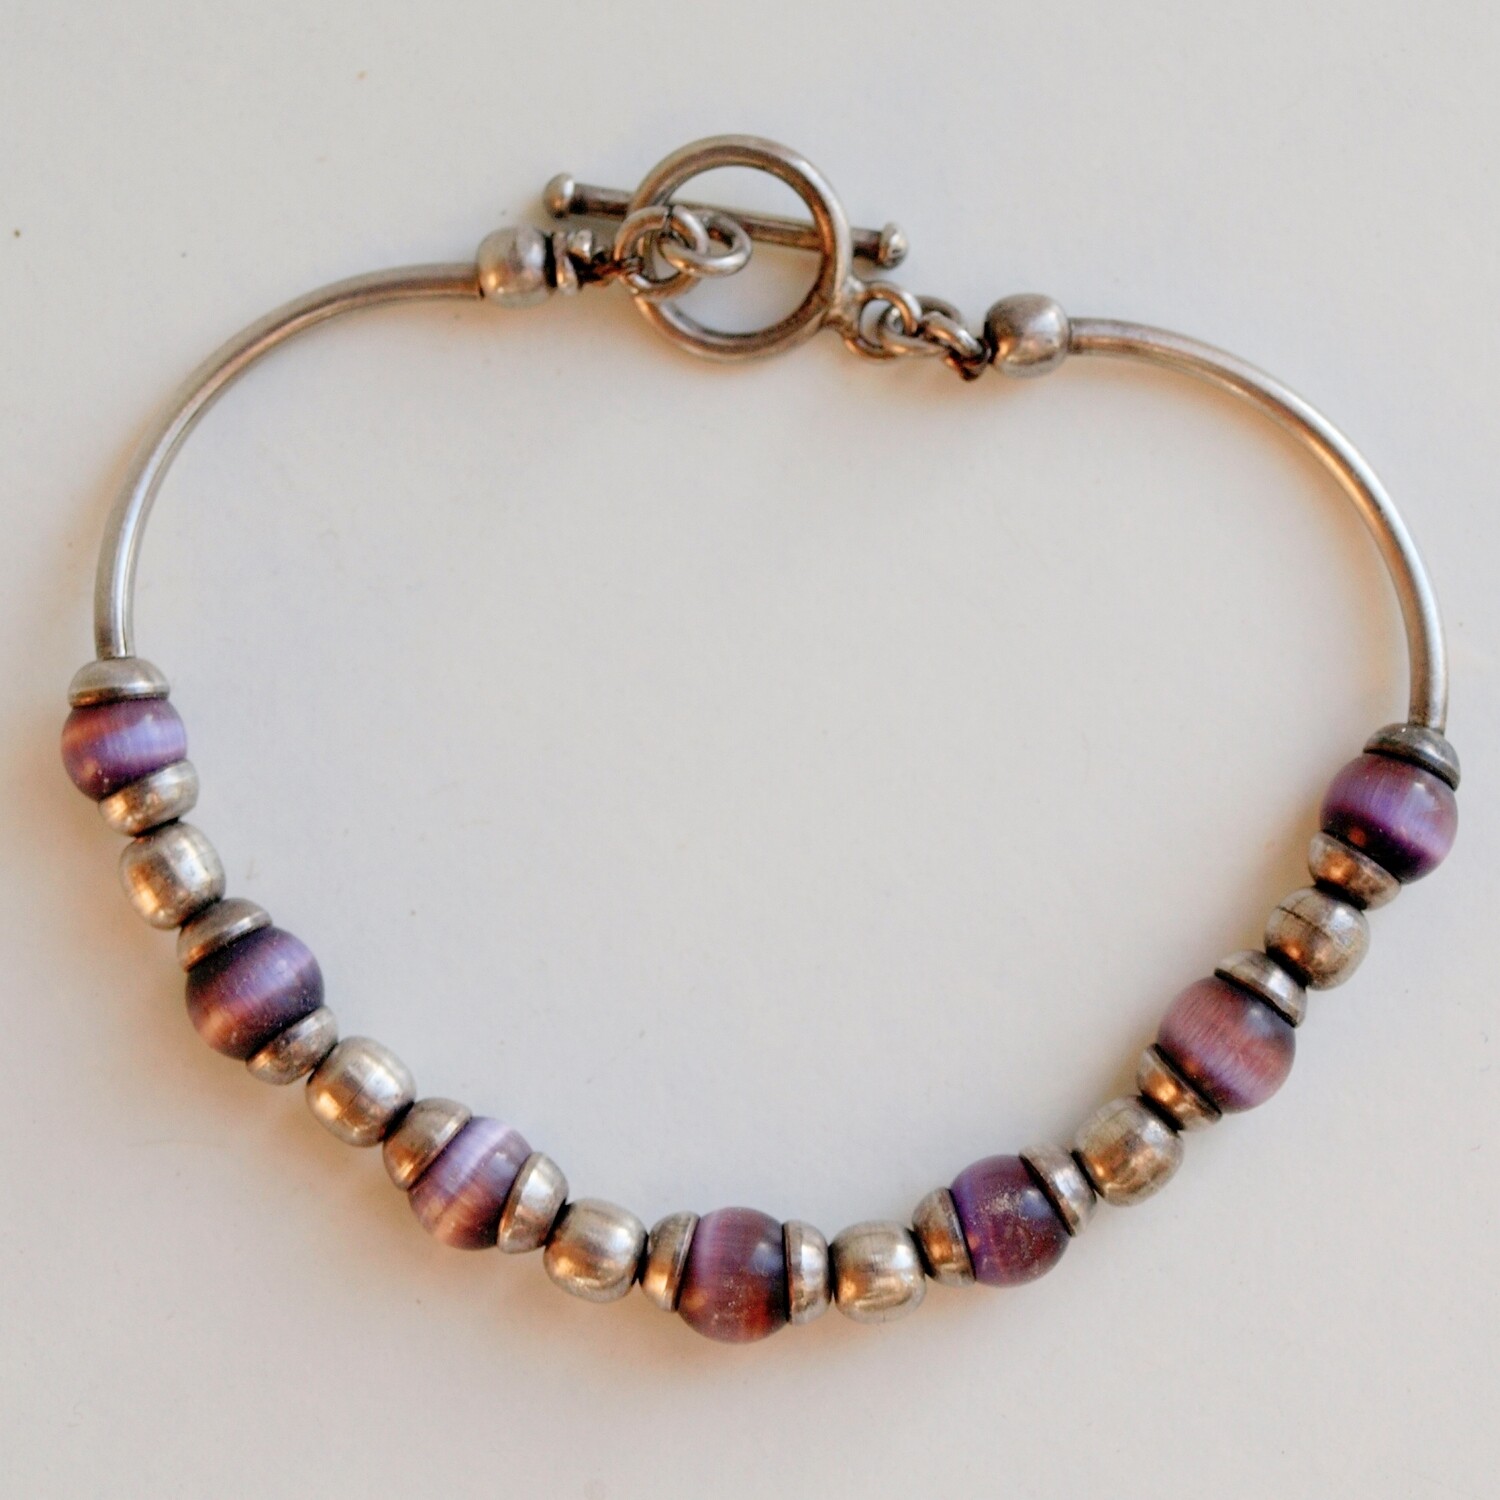 Large Ladies Solid Silver & Lilac Cats Eye Bead Bracelet